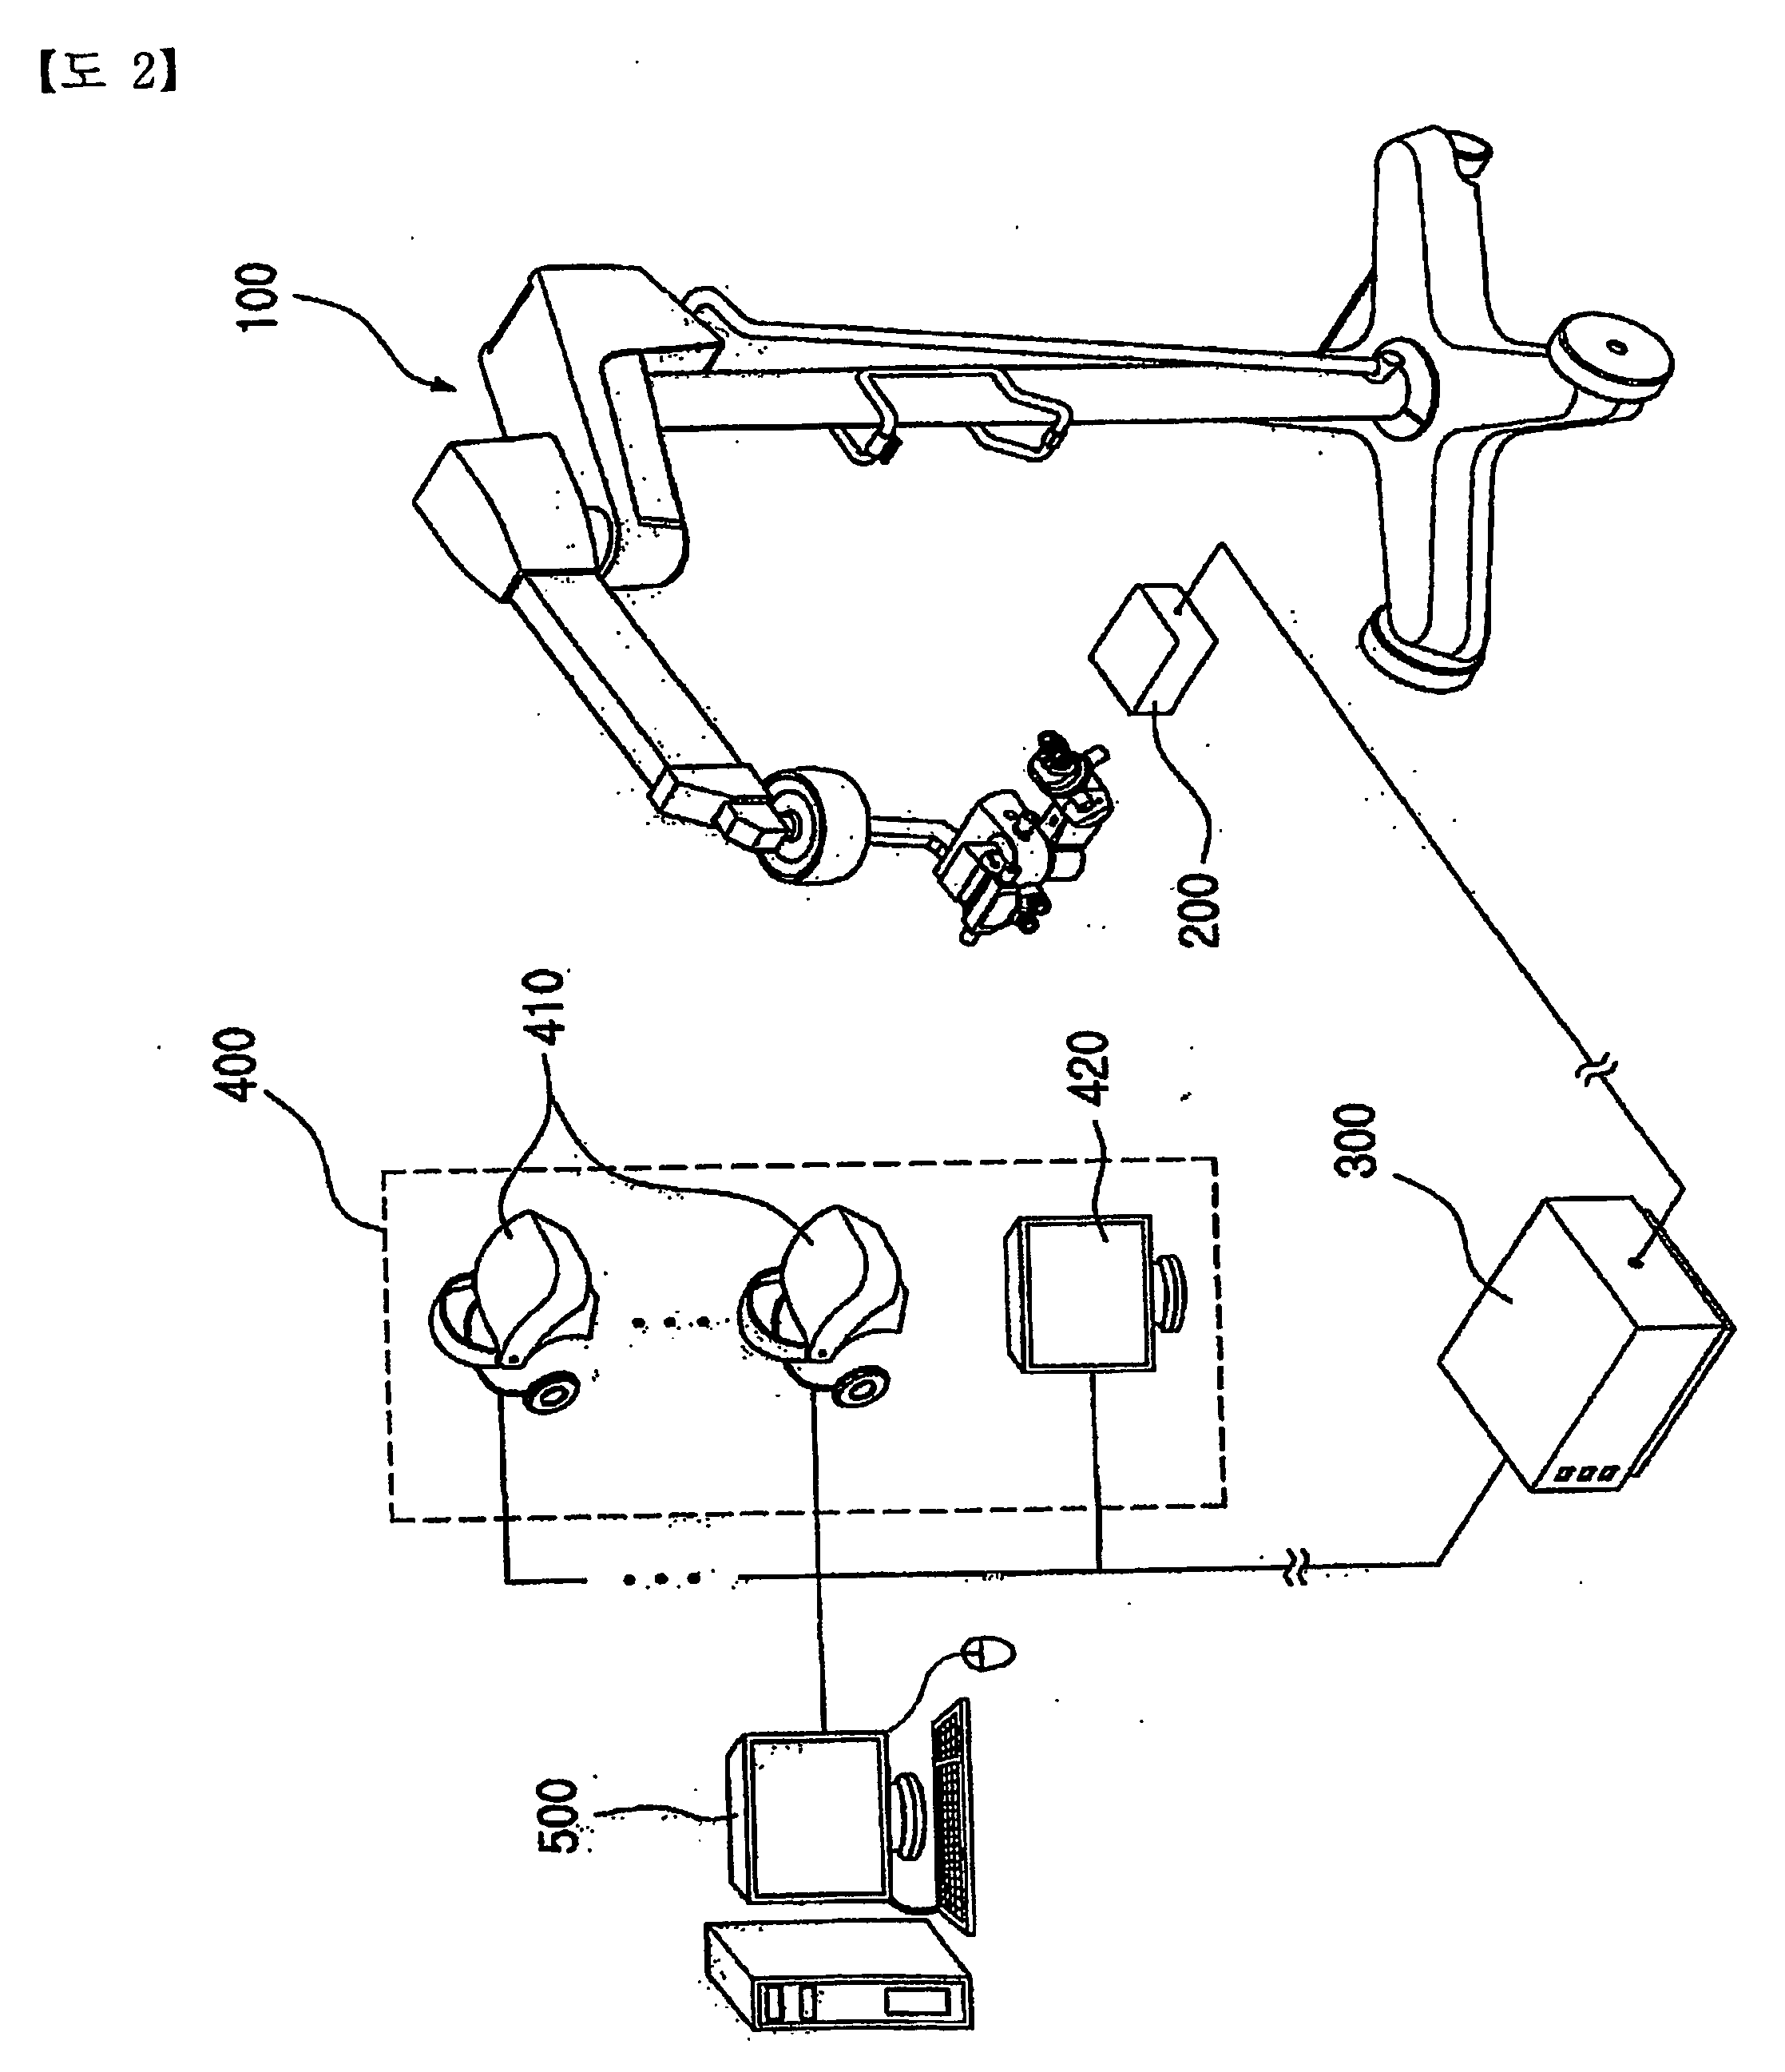 Image acquisition/output apparatus and ophthalmology picture system using the same